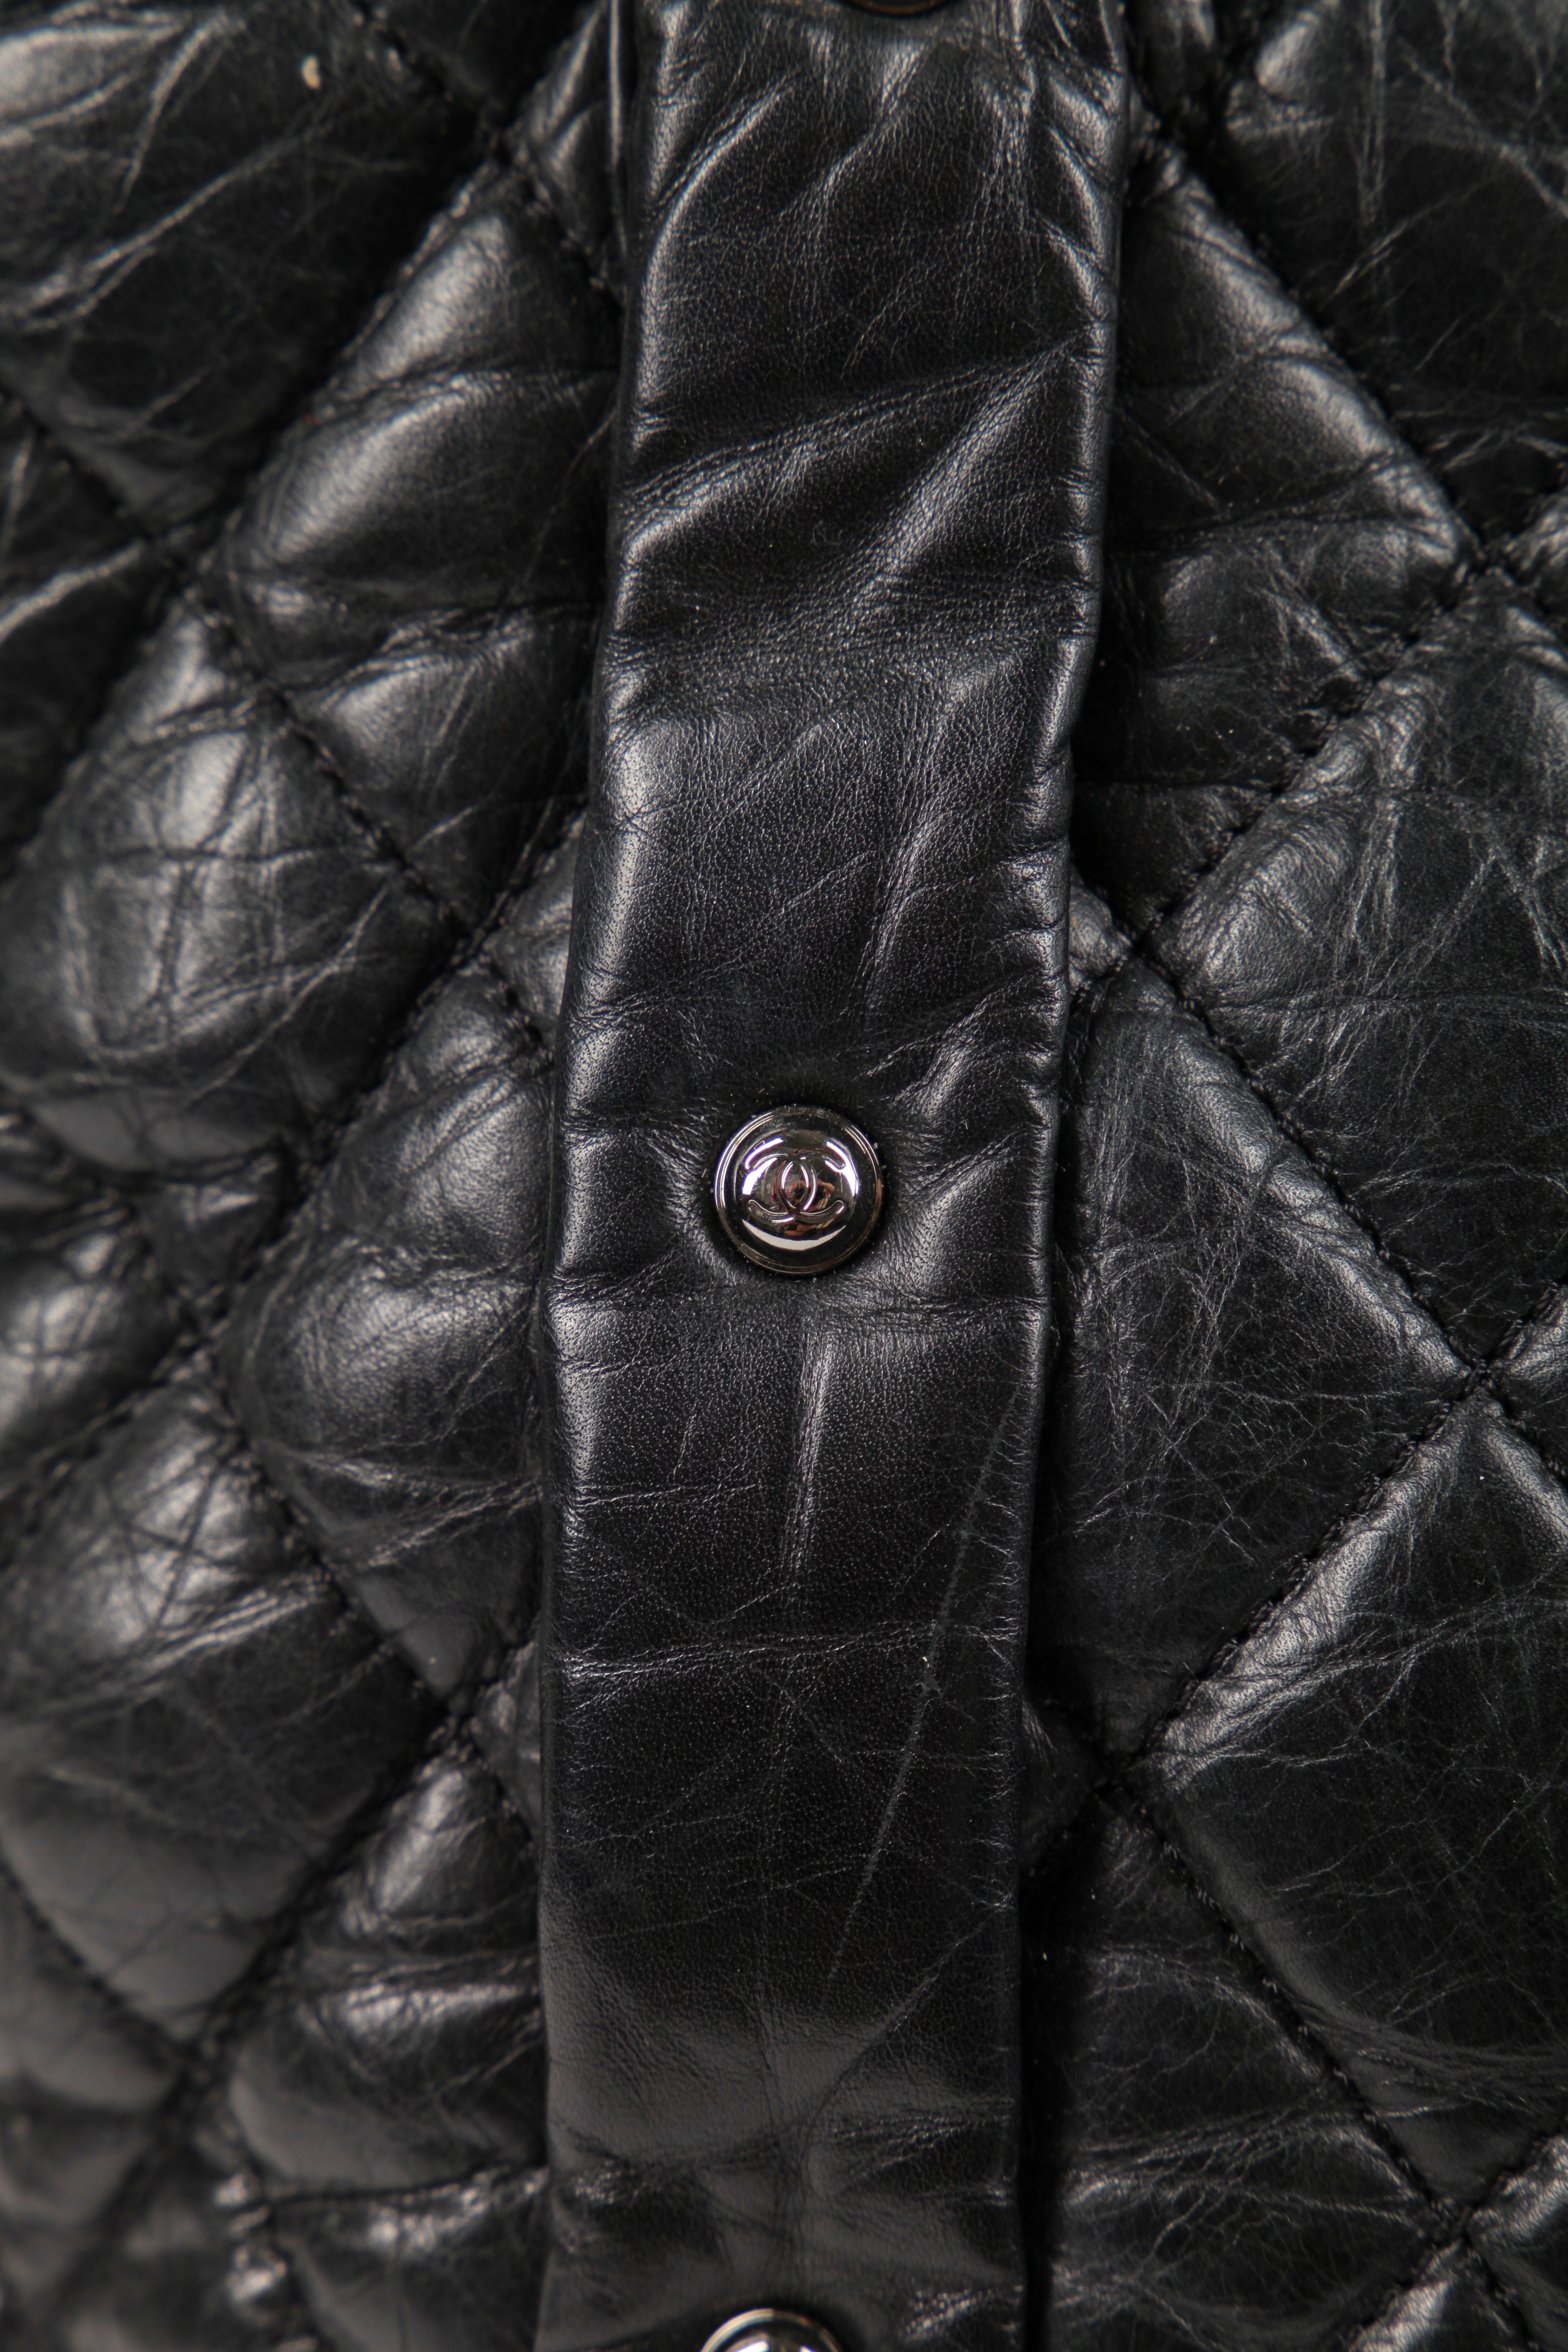 Lot 13 - A Chanel black quilted lambskin leather bag